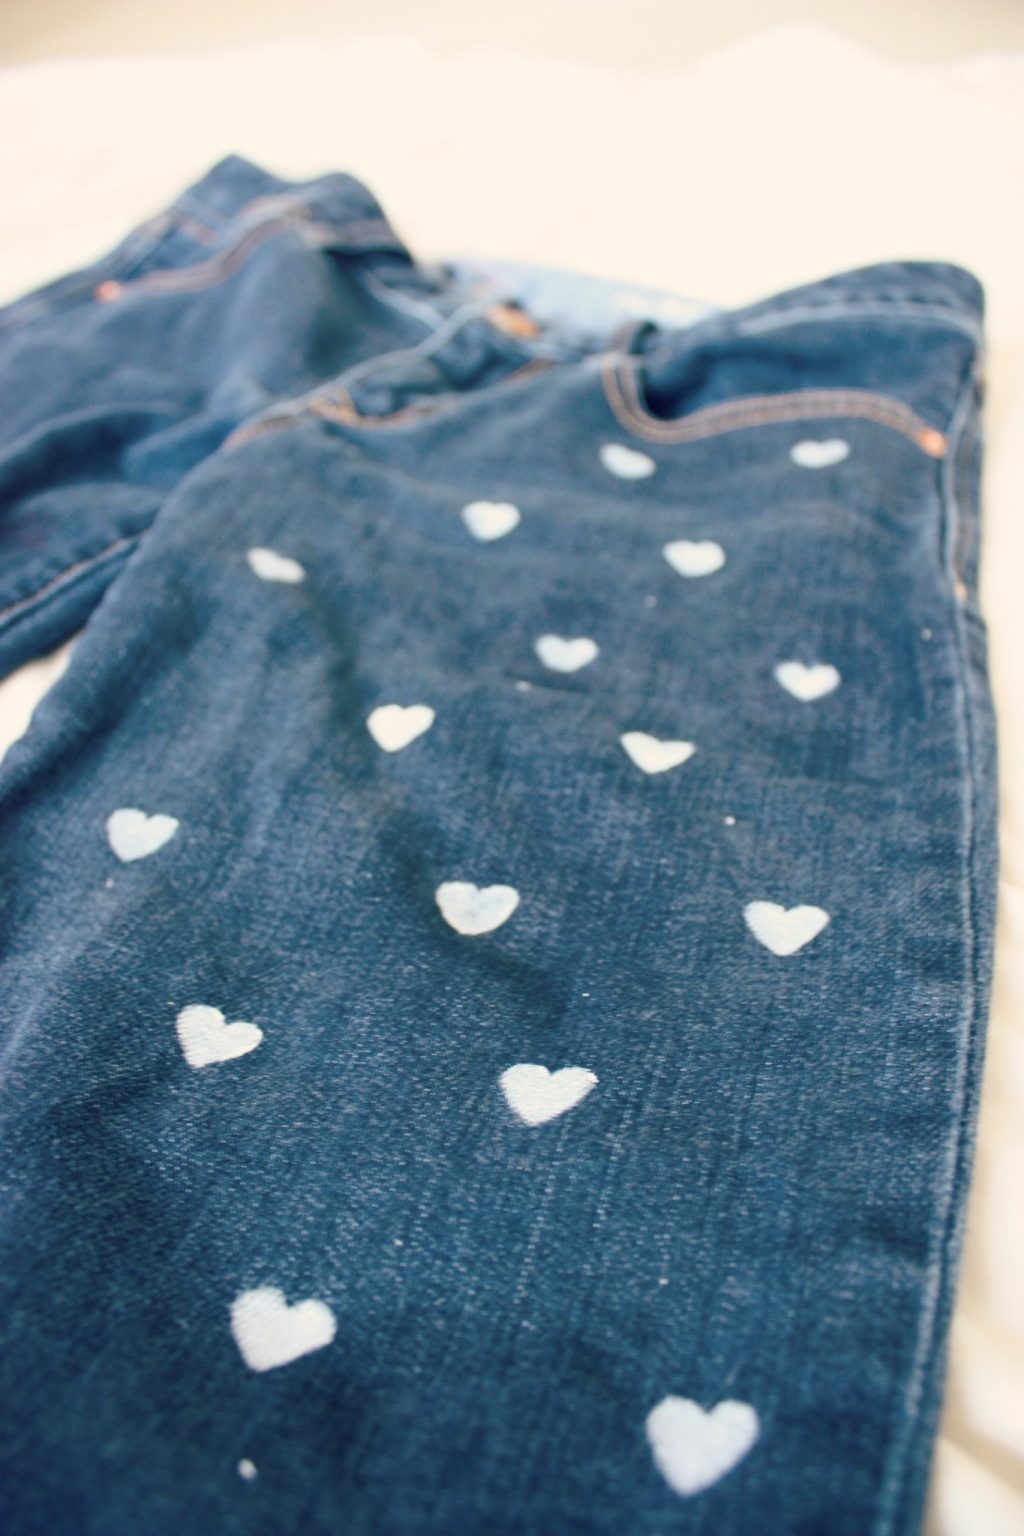 DIY Heart Patterned Jeans + featured by Top US Craft Blog + The Pretty Life Girls